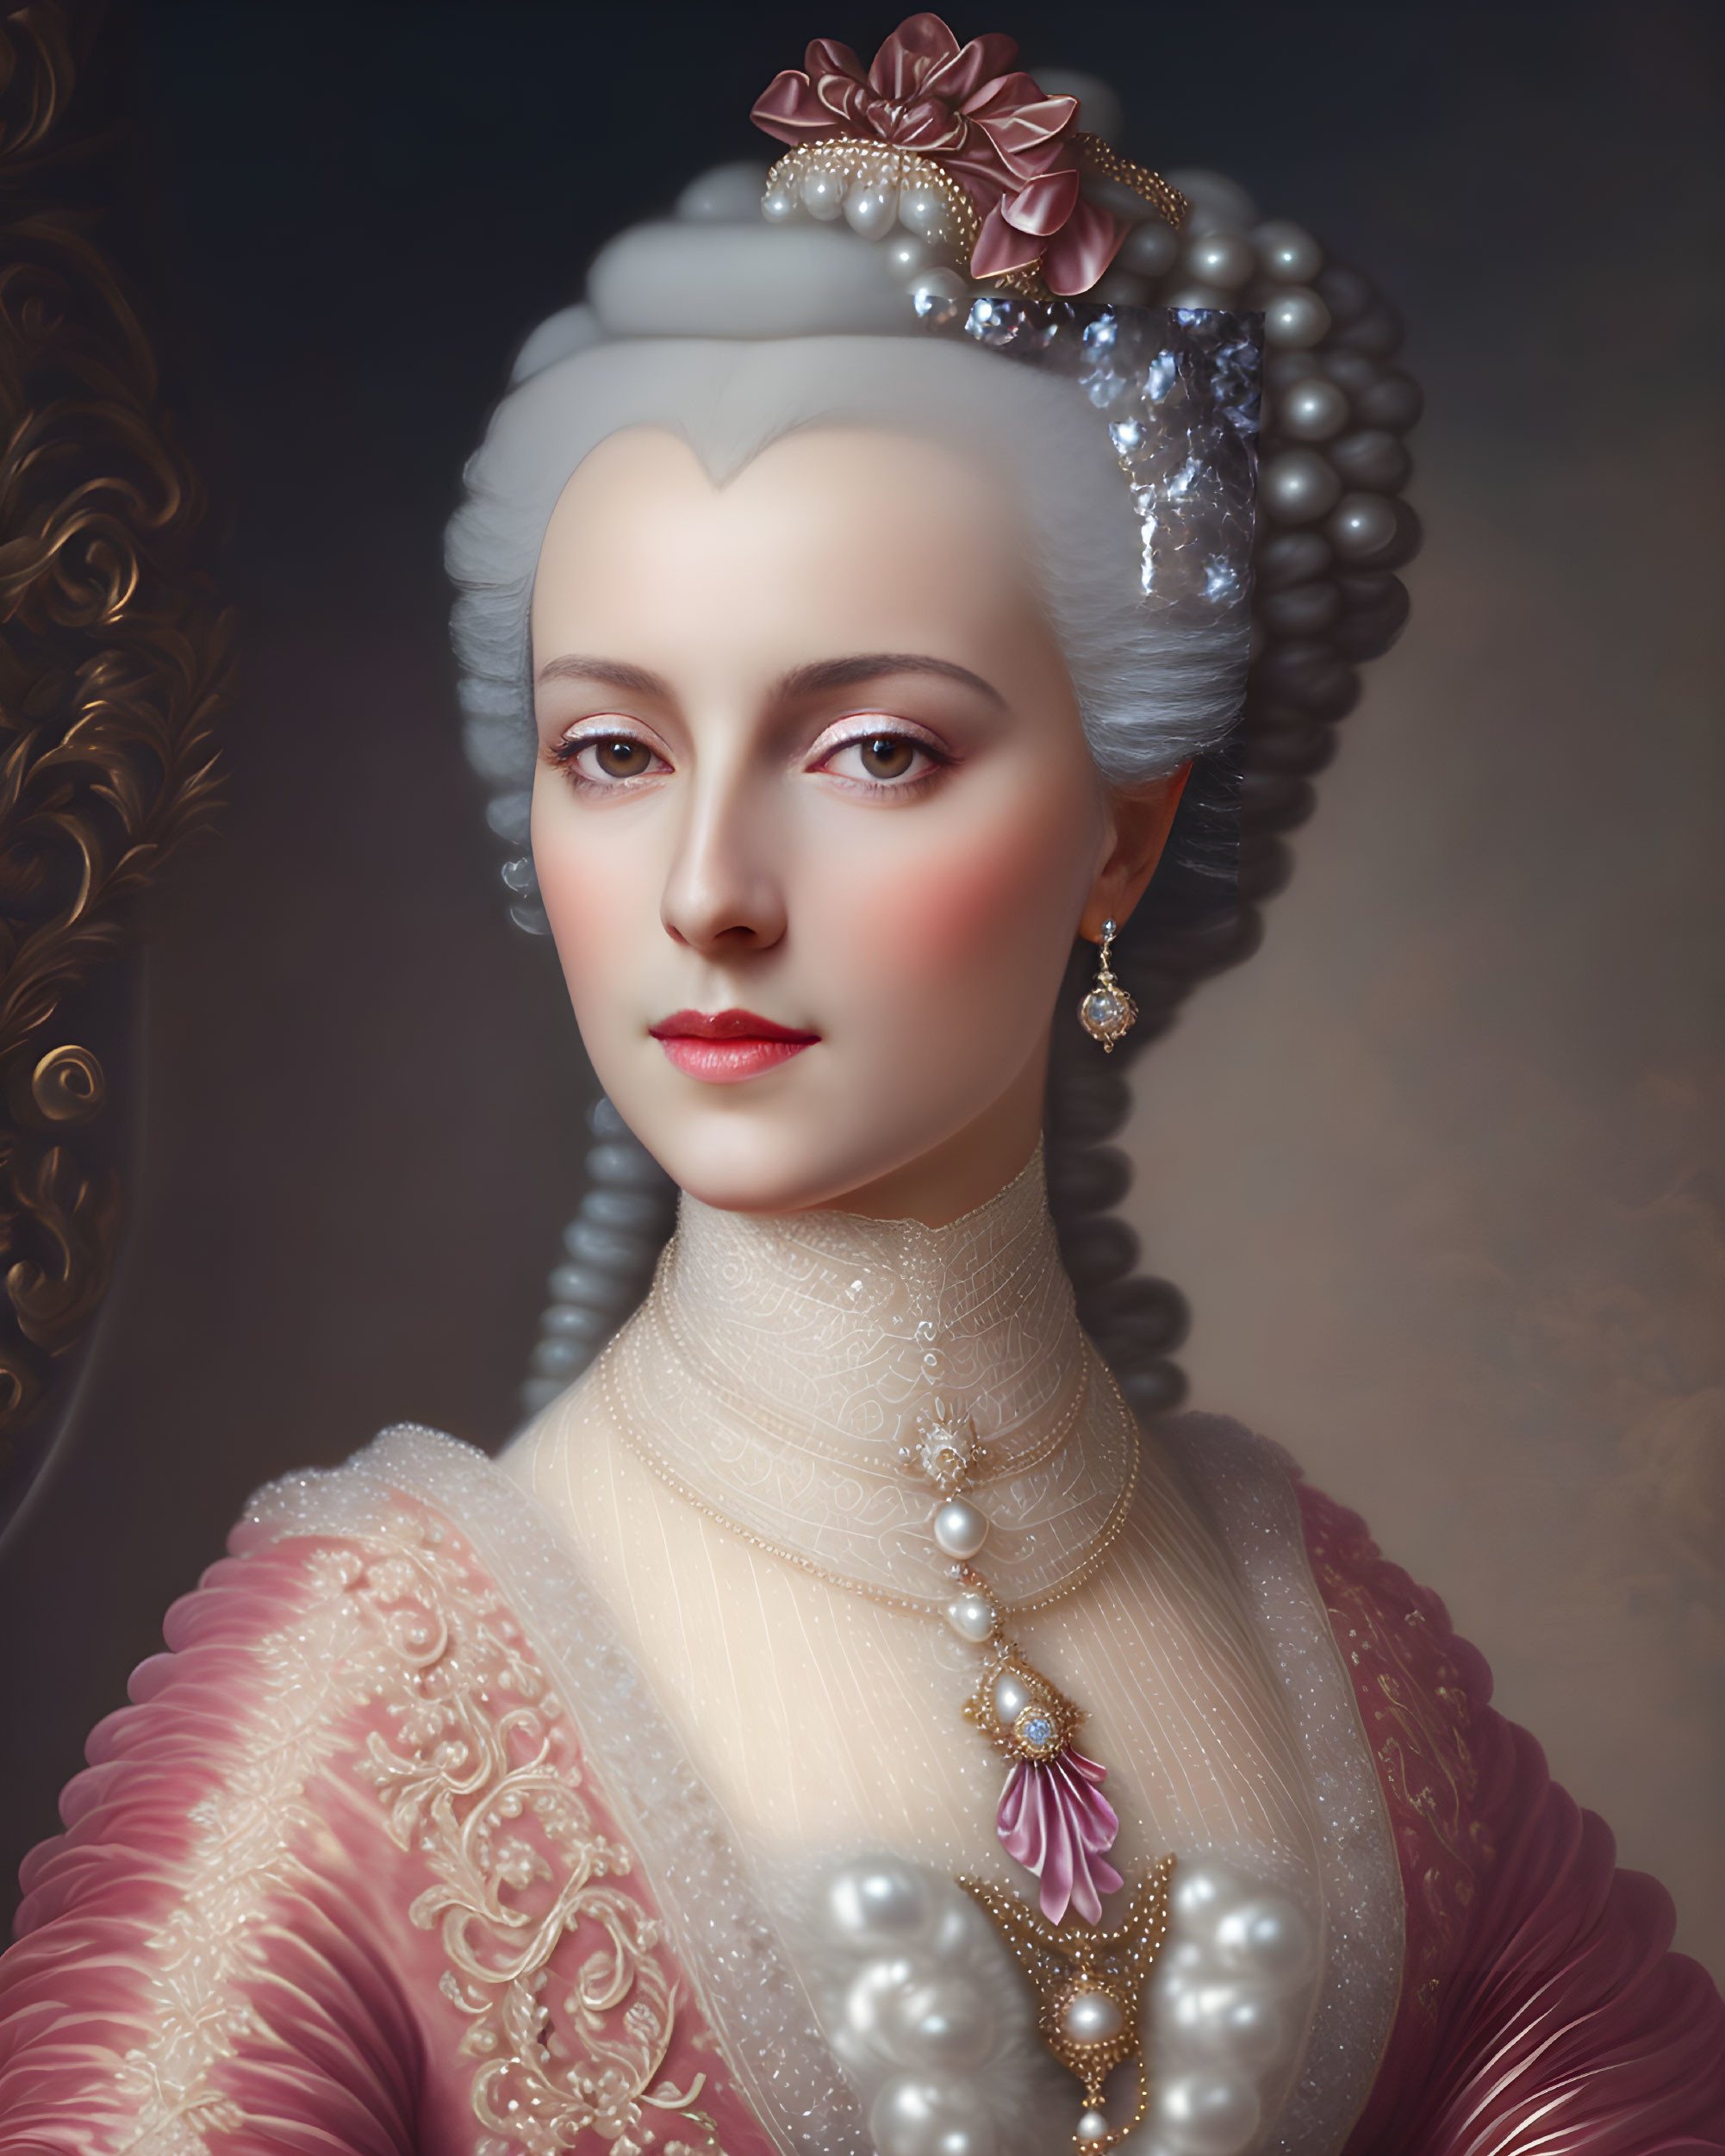 Classic Portrait of Woman with High Hairstyle & Pearls